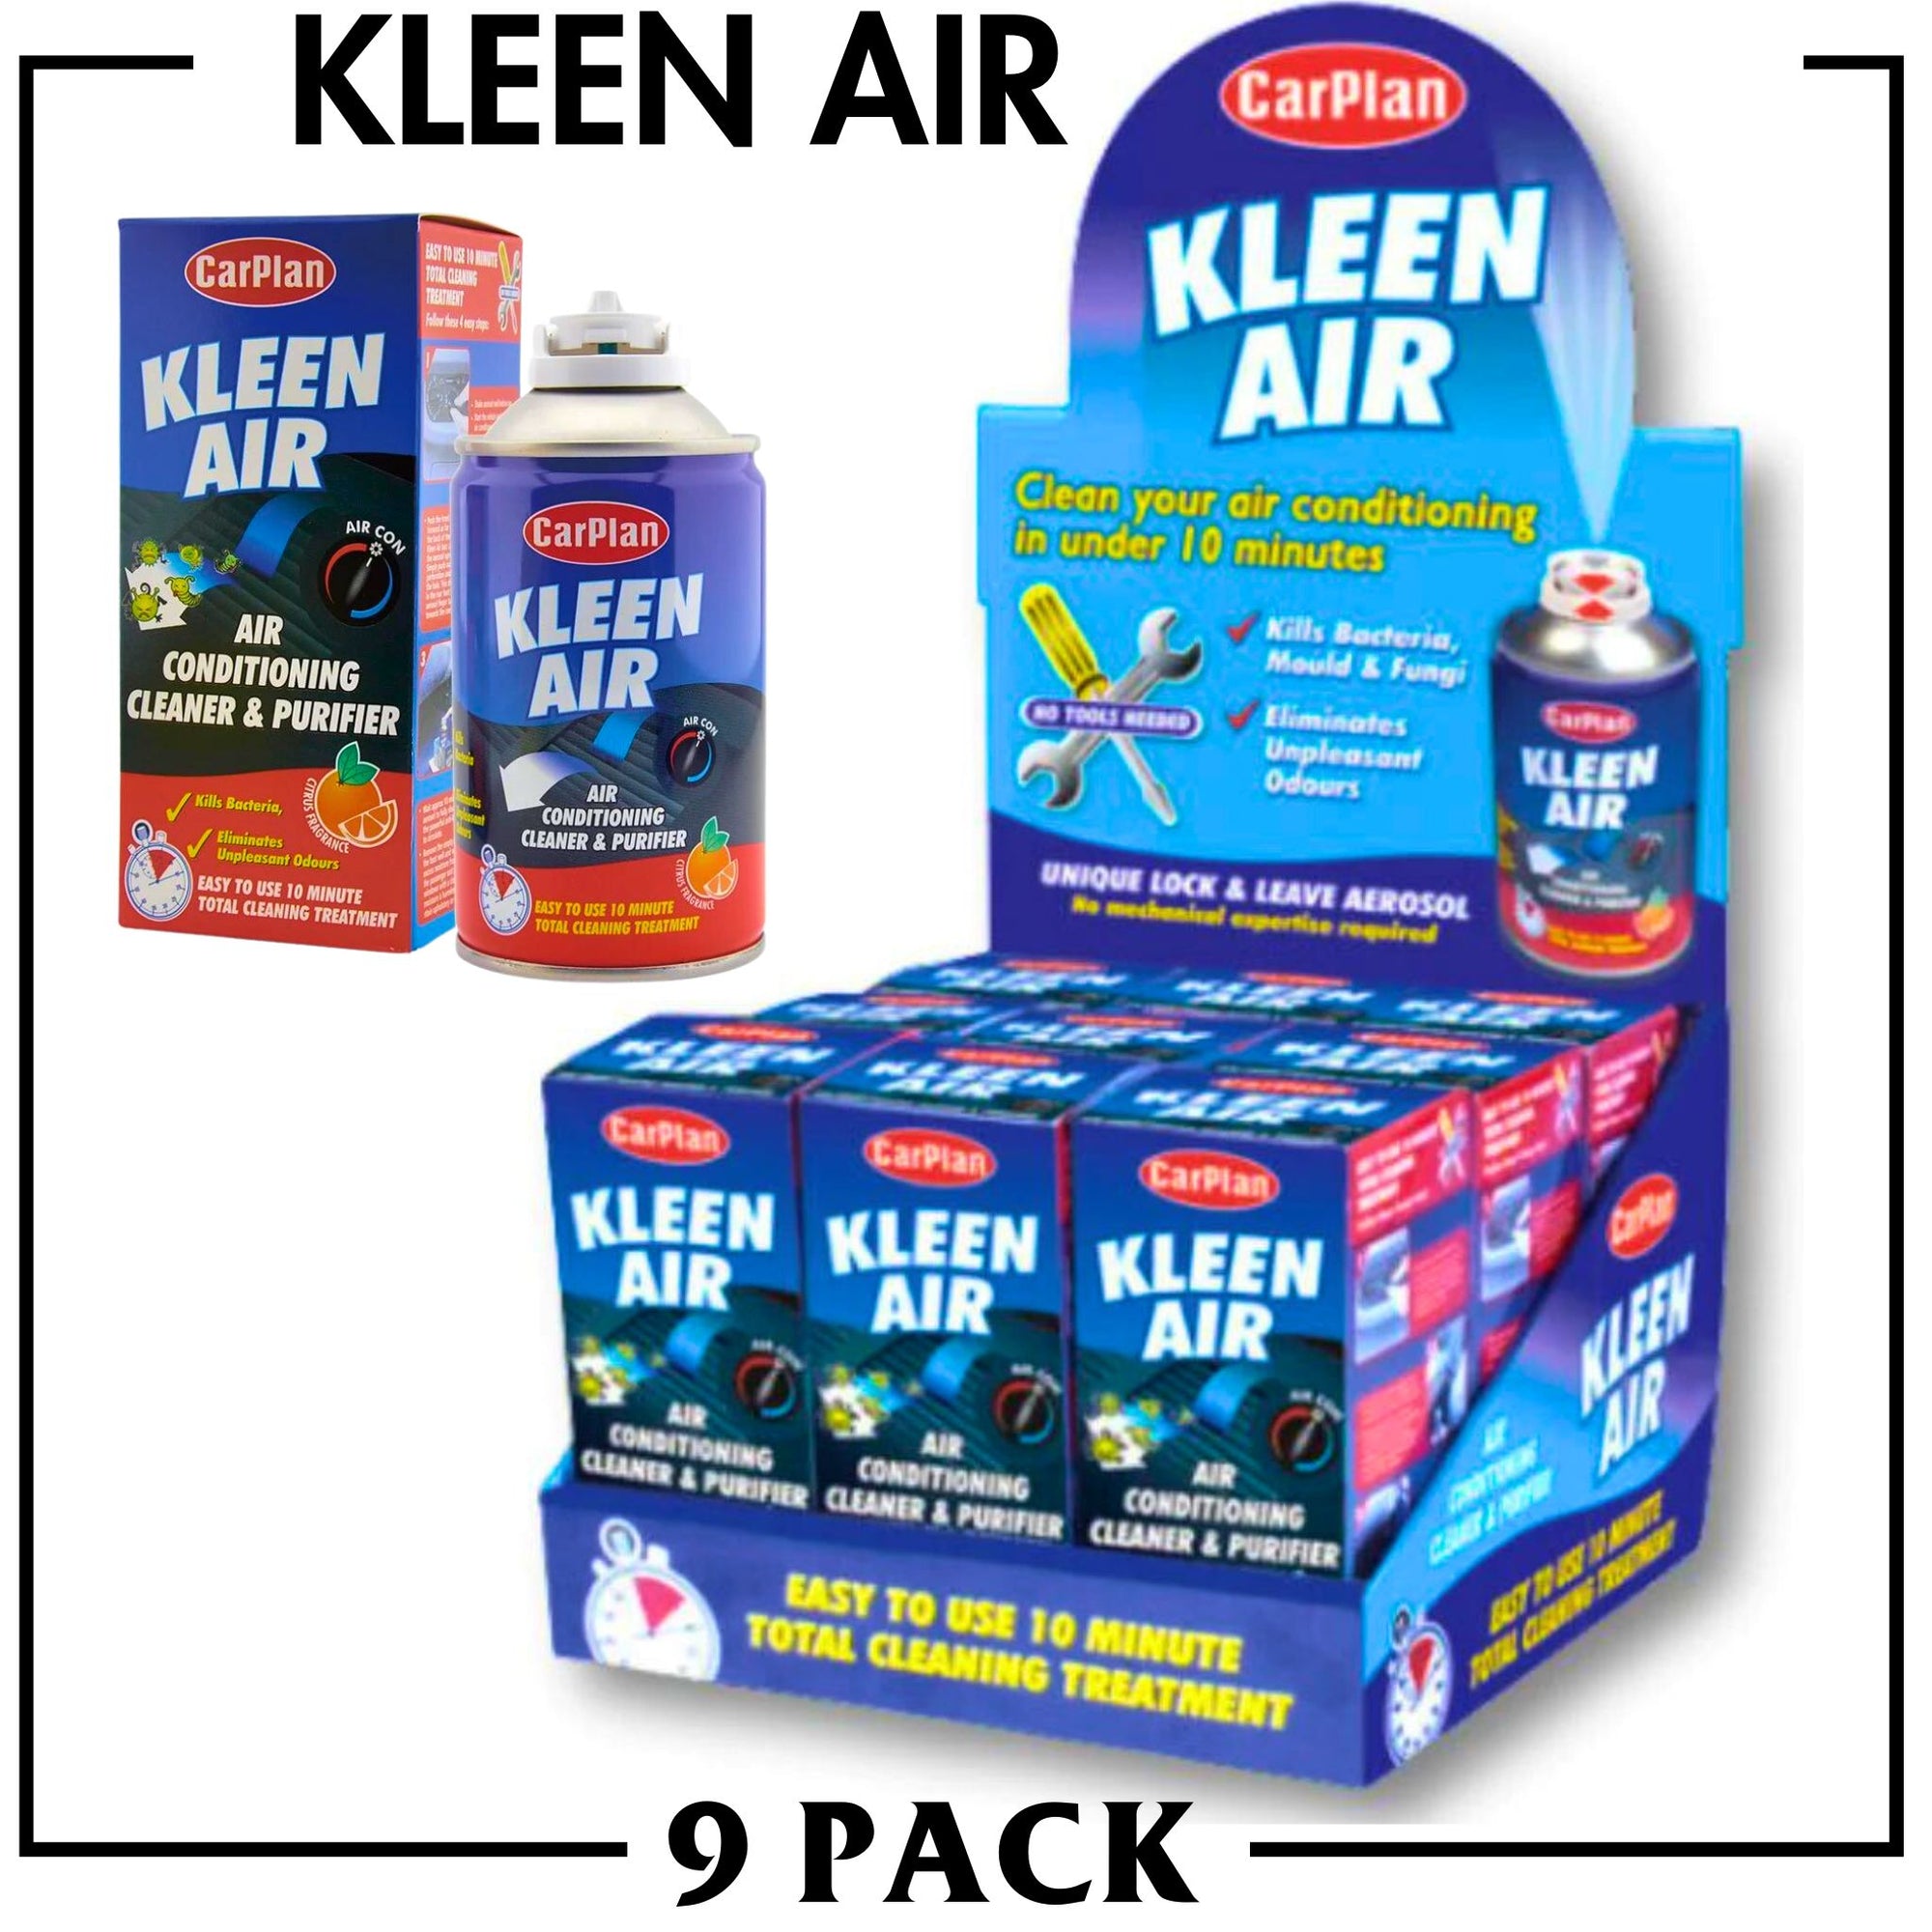 (9 PACK) CarPlan Kleen Air Conditioner Cleaner & Sanitiser SOA009 - South East Clearance Centre